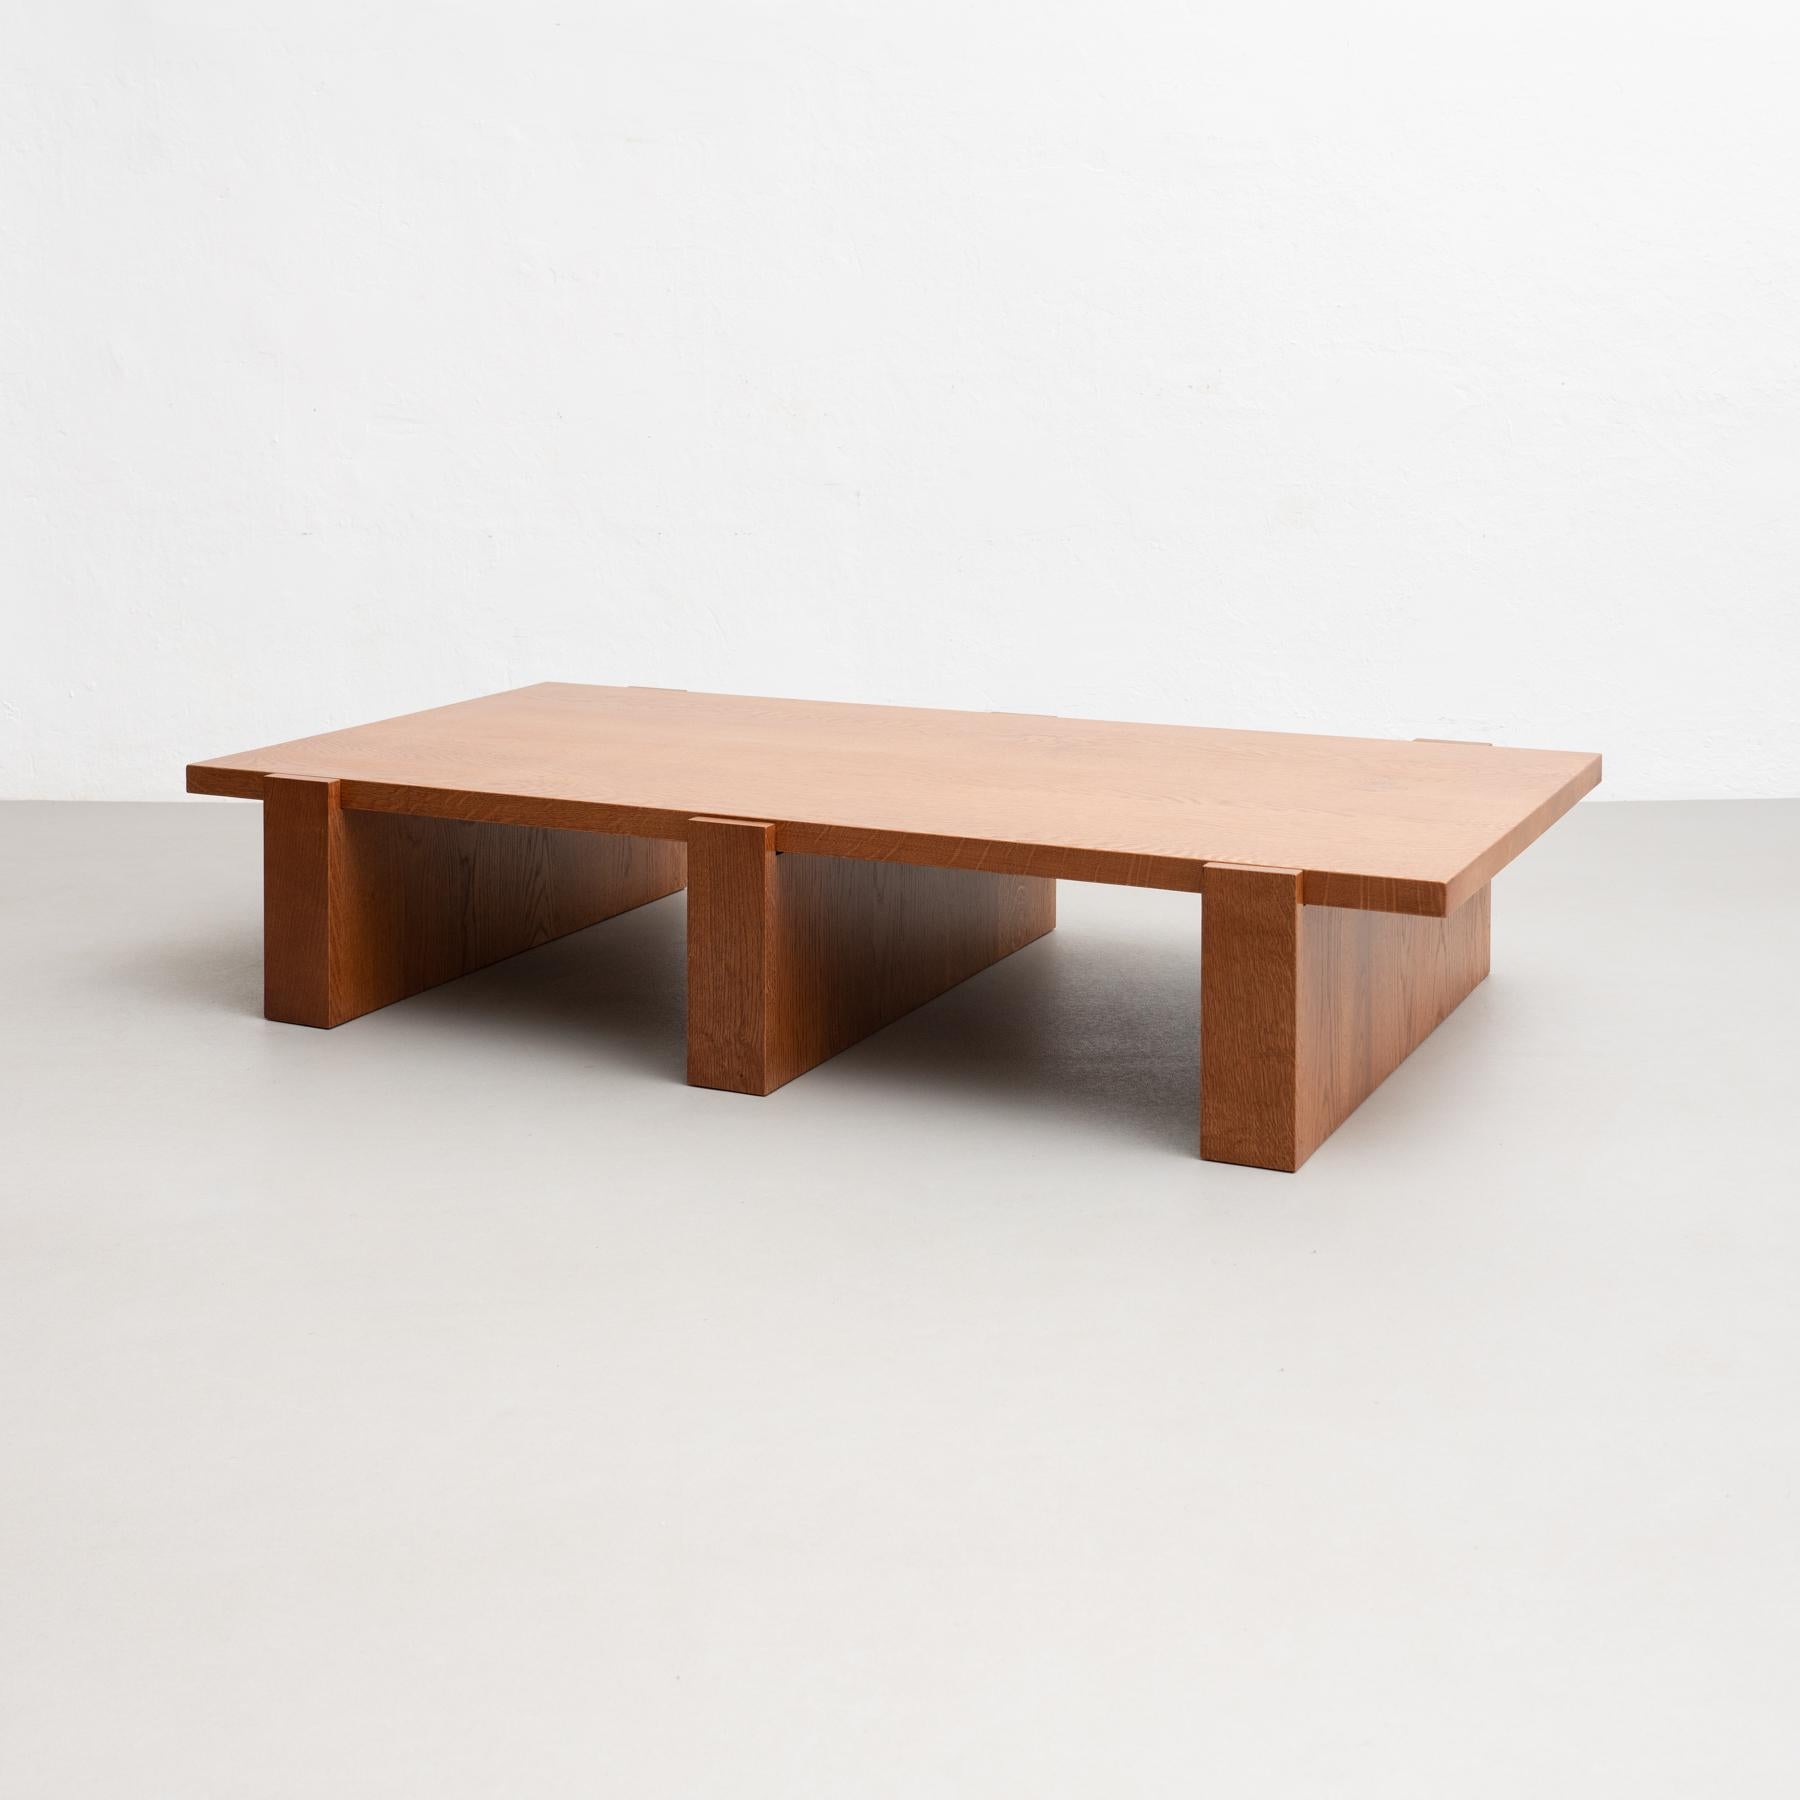 Dada Est. Contemporary Solid Oak Low Table  In Good Condition For Sale In Barcelona, Barcelona